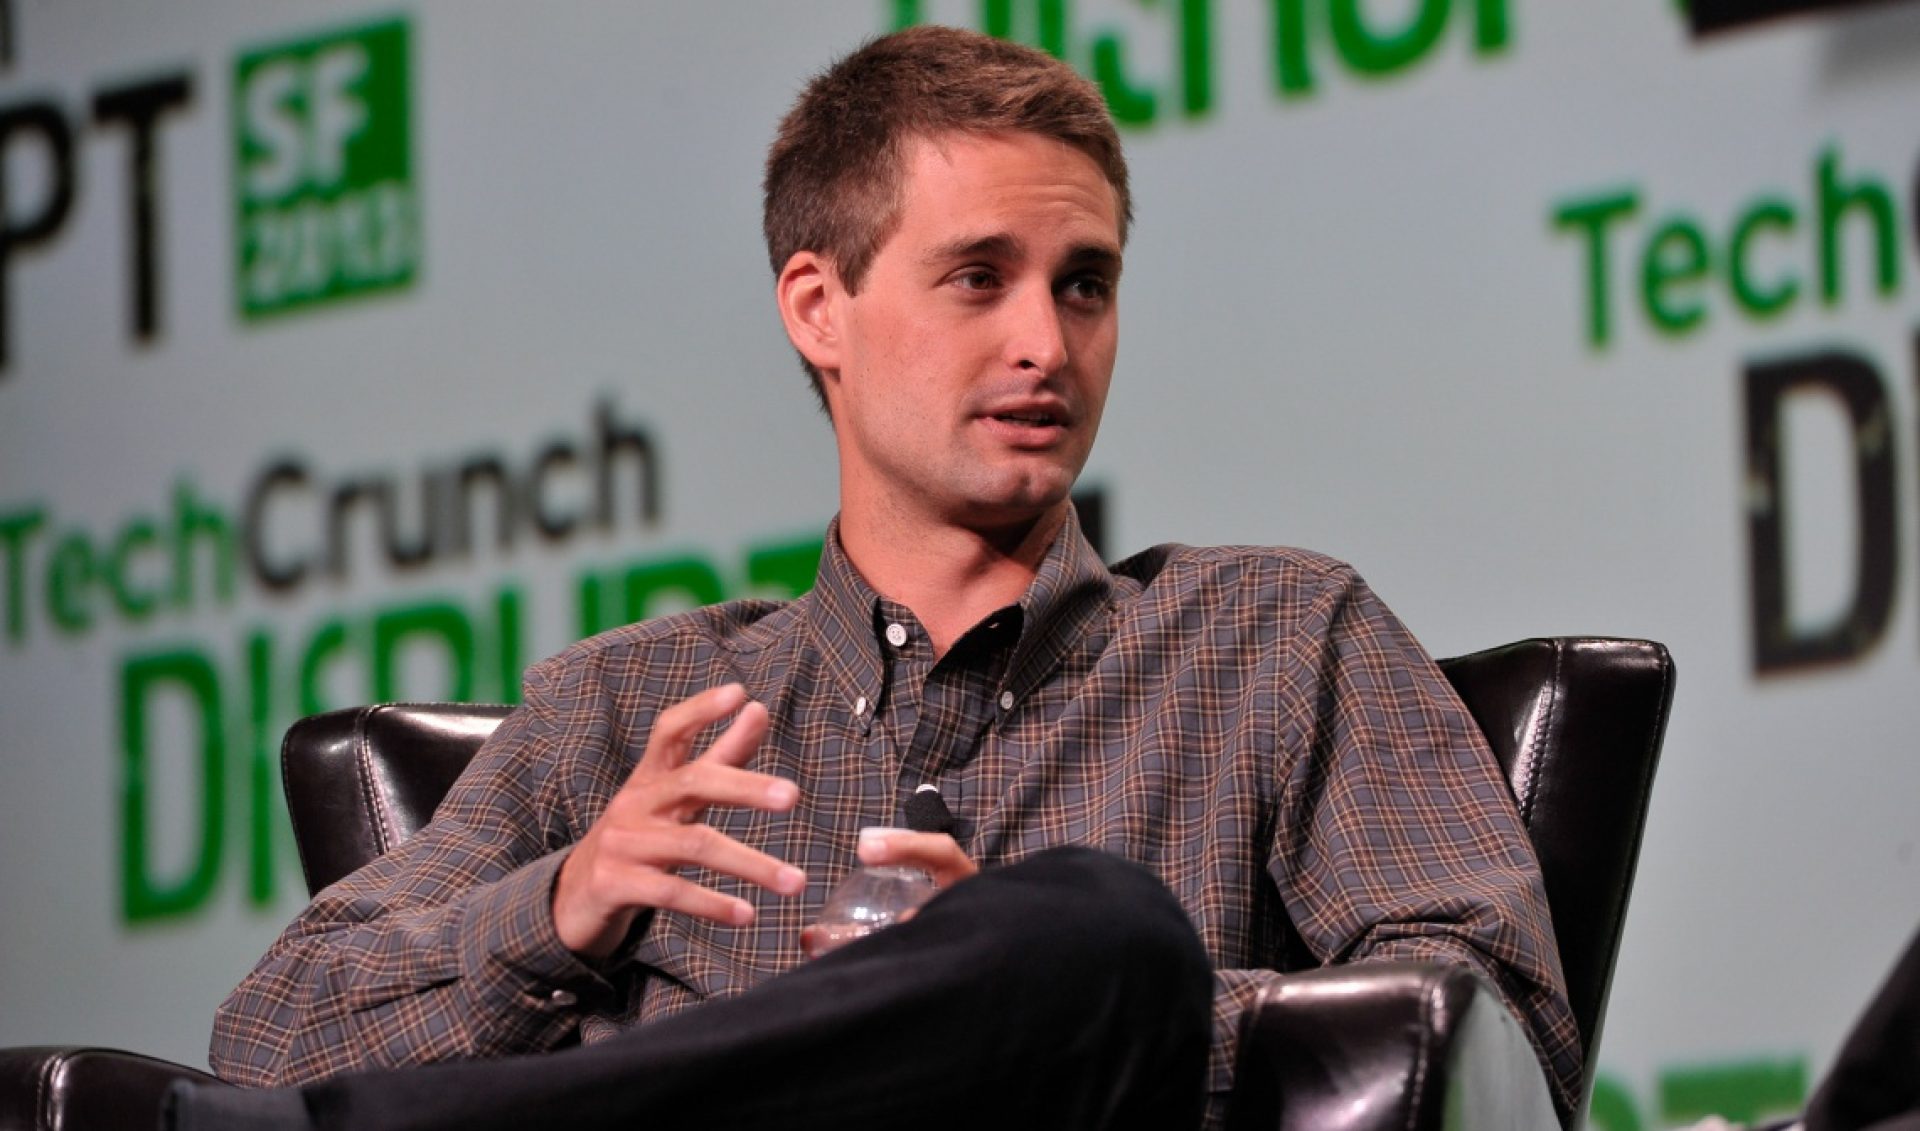 Snapchat Plans To Sort Stories With Algorithms In Effort To Reverse Downward Trend